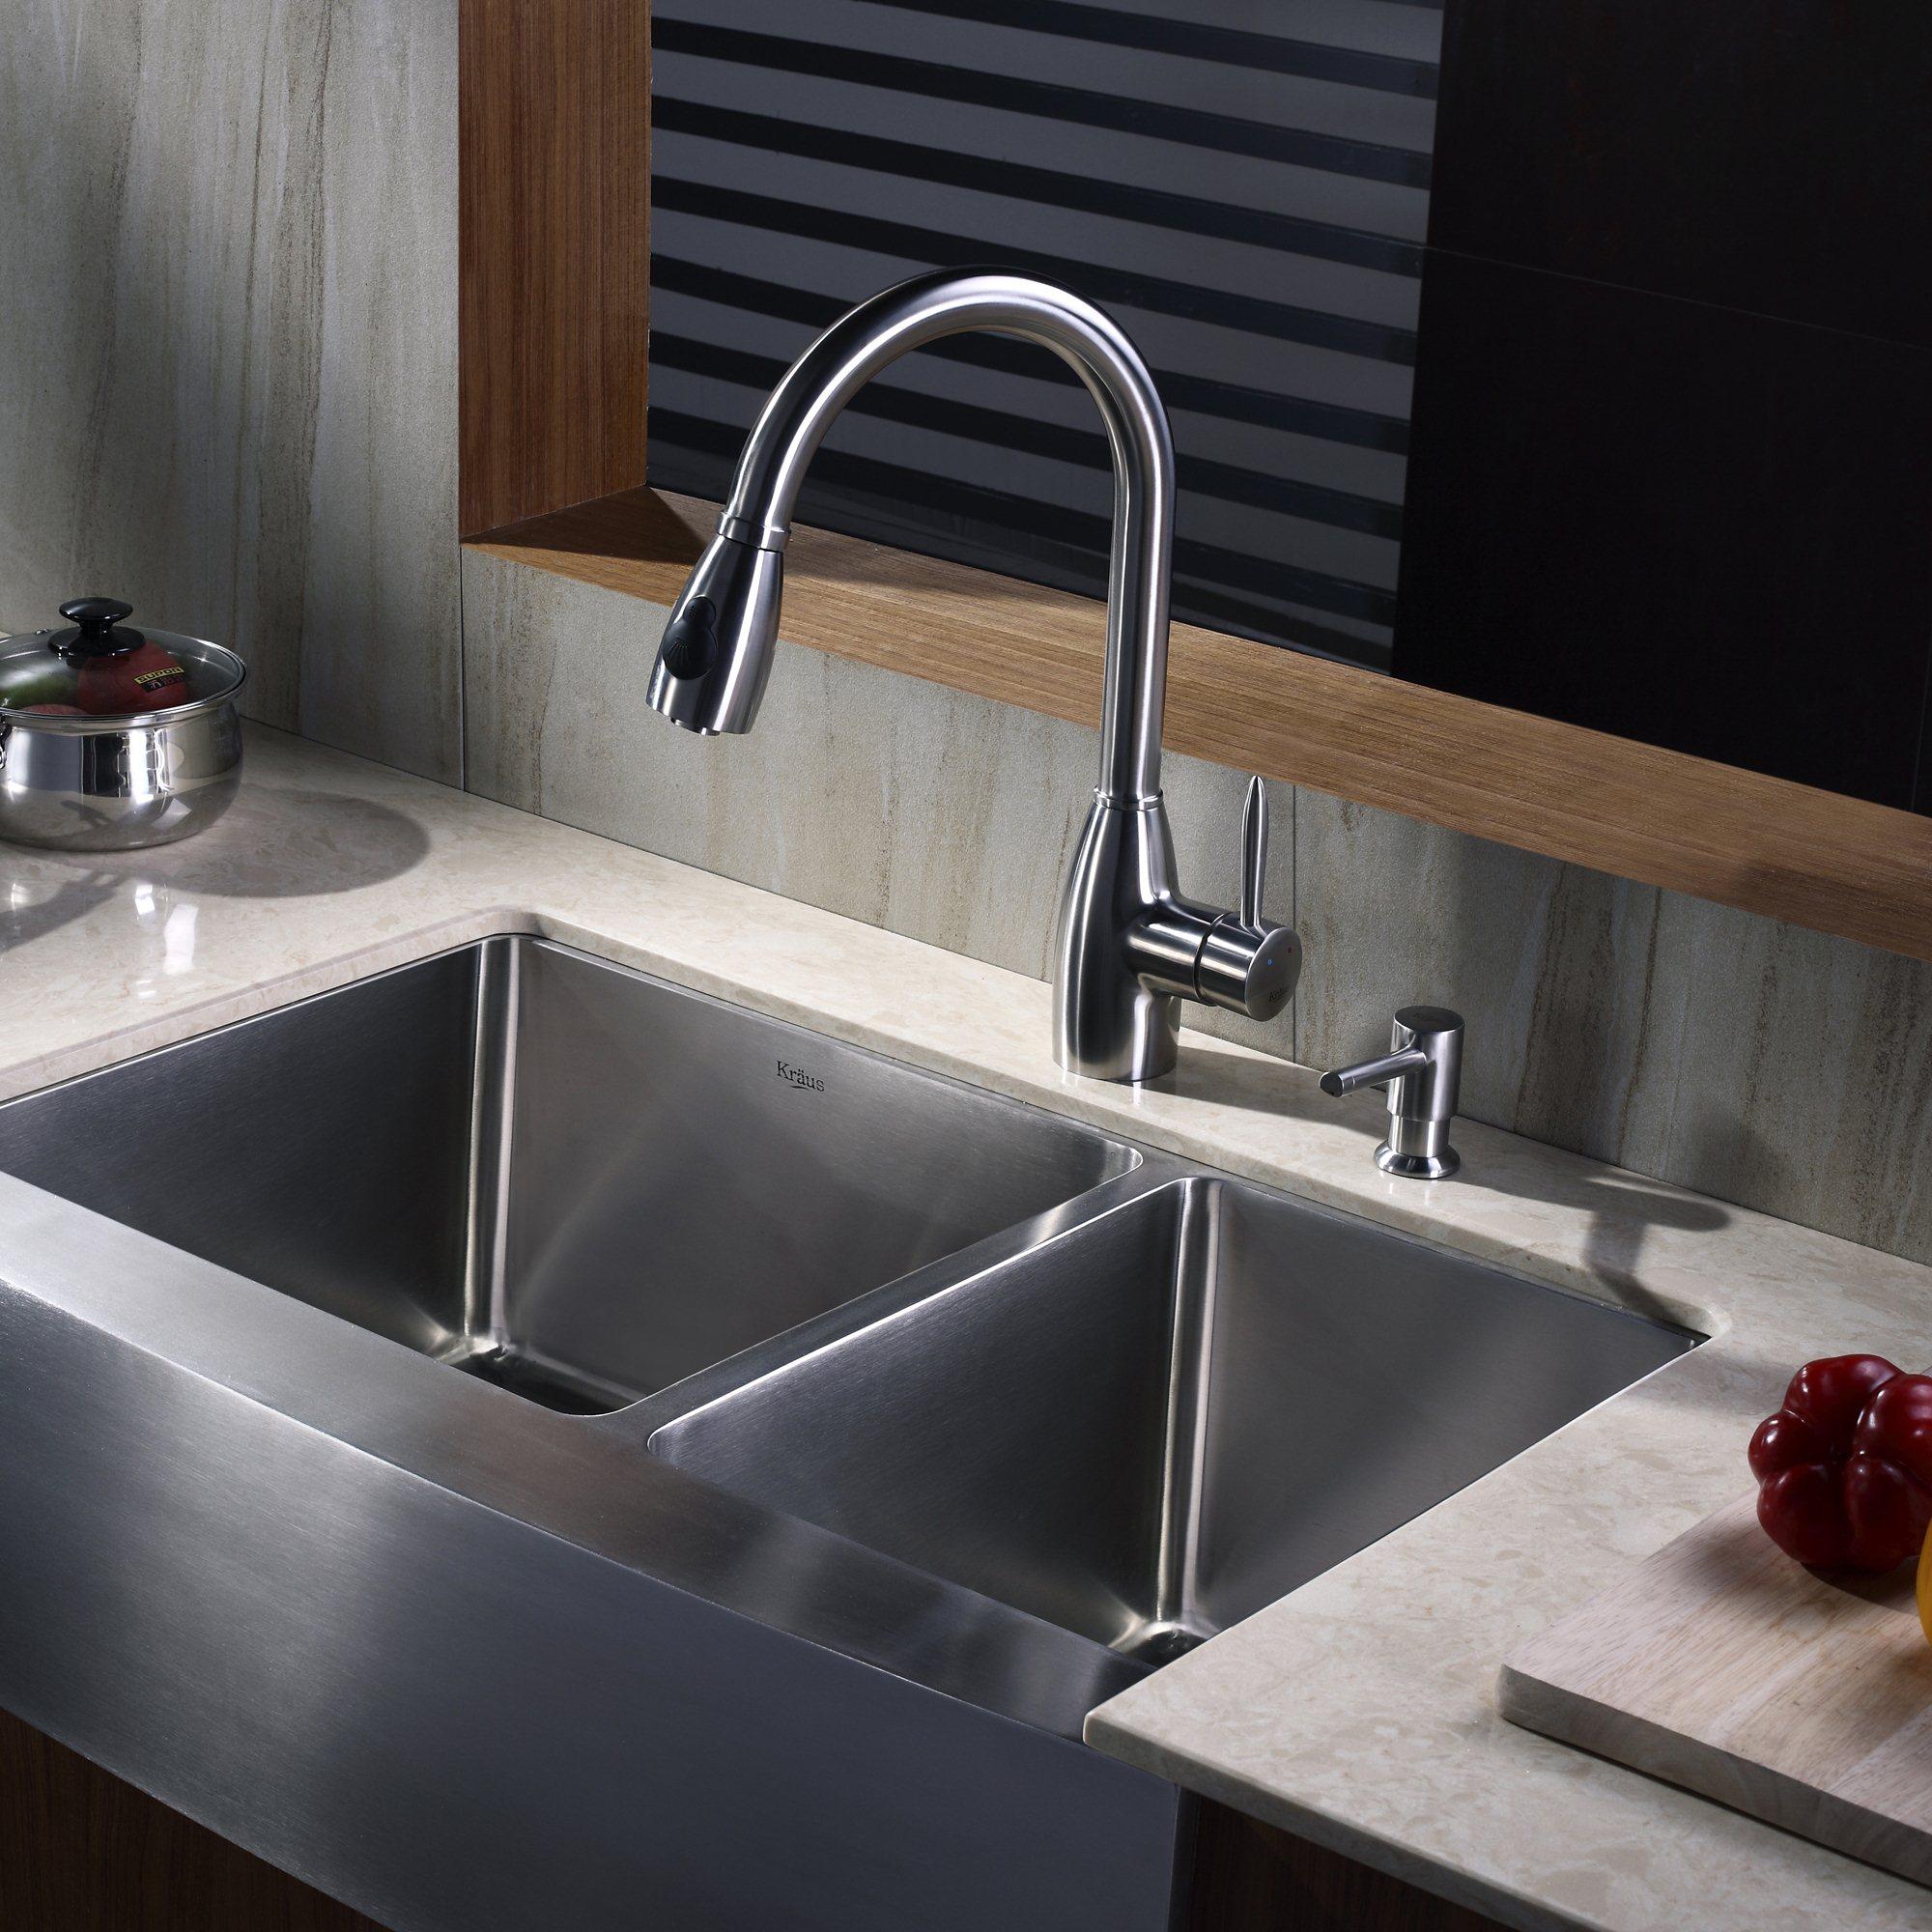 KRAUS 36 Inch Farmhouse Single Bowl Stainless Steel Kitchen Sink with  Kitchen Faucet and Soap Dispenser in Stainless Steel - Bed Bath & Beyond -  4389932